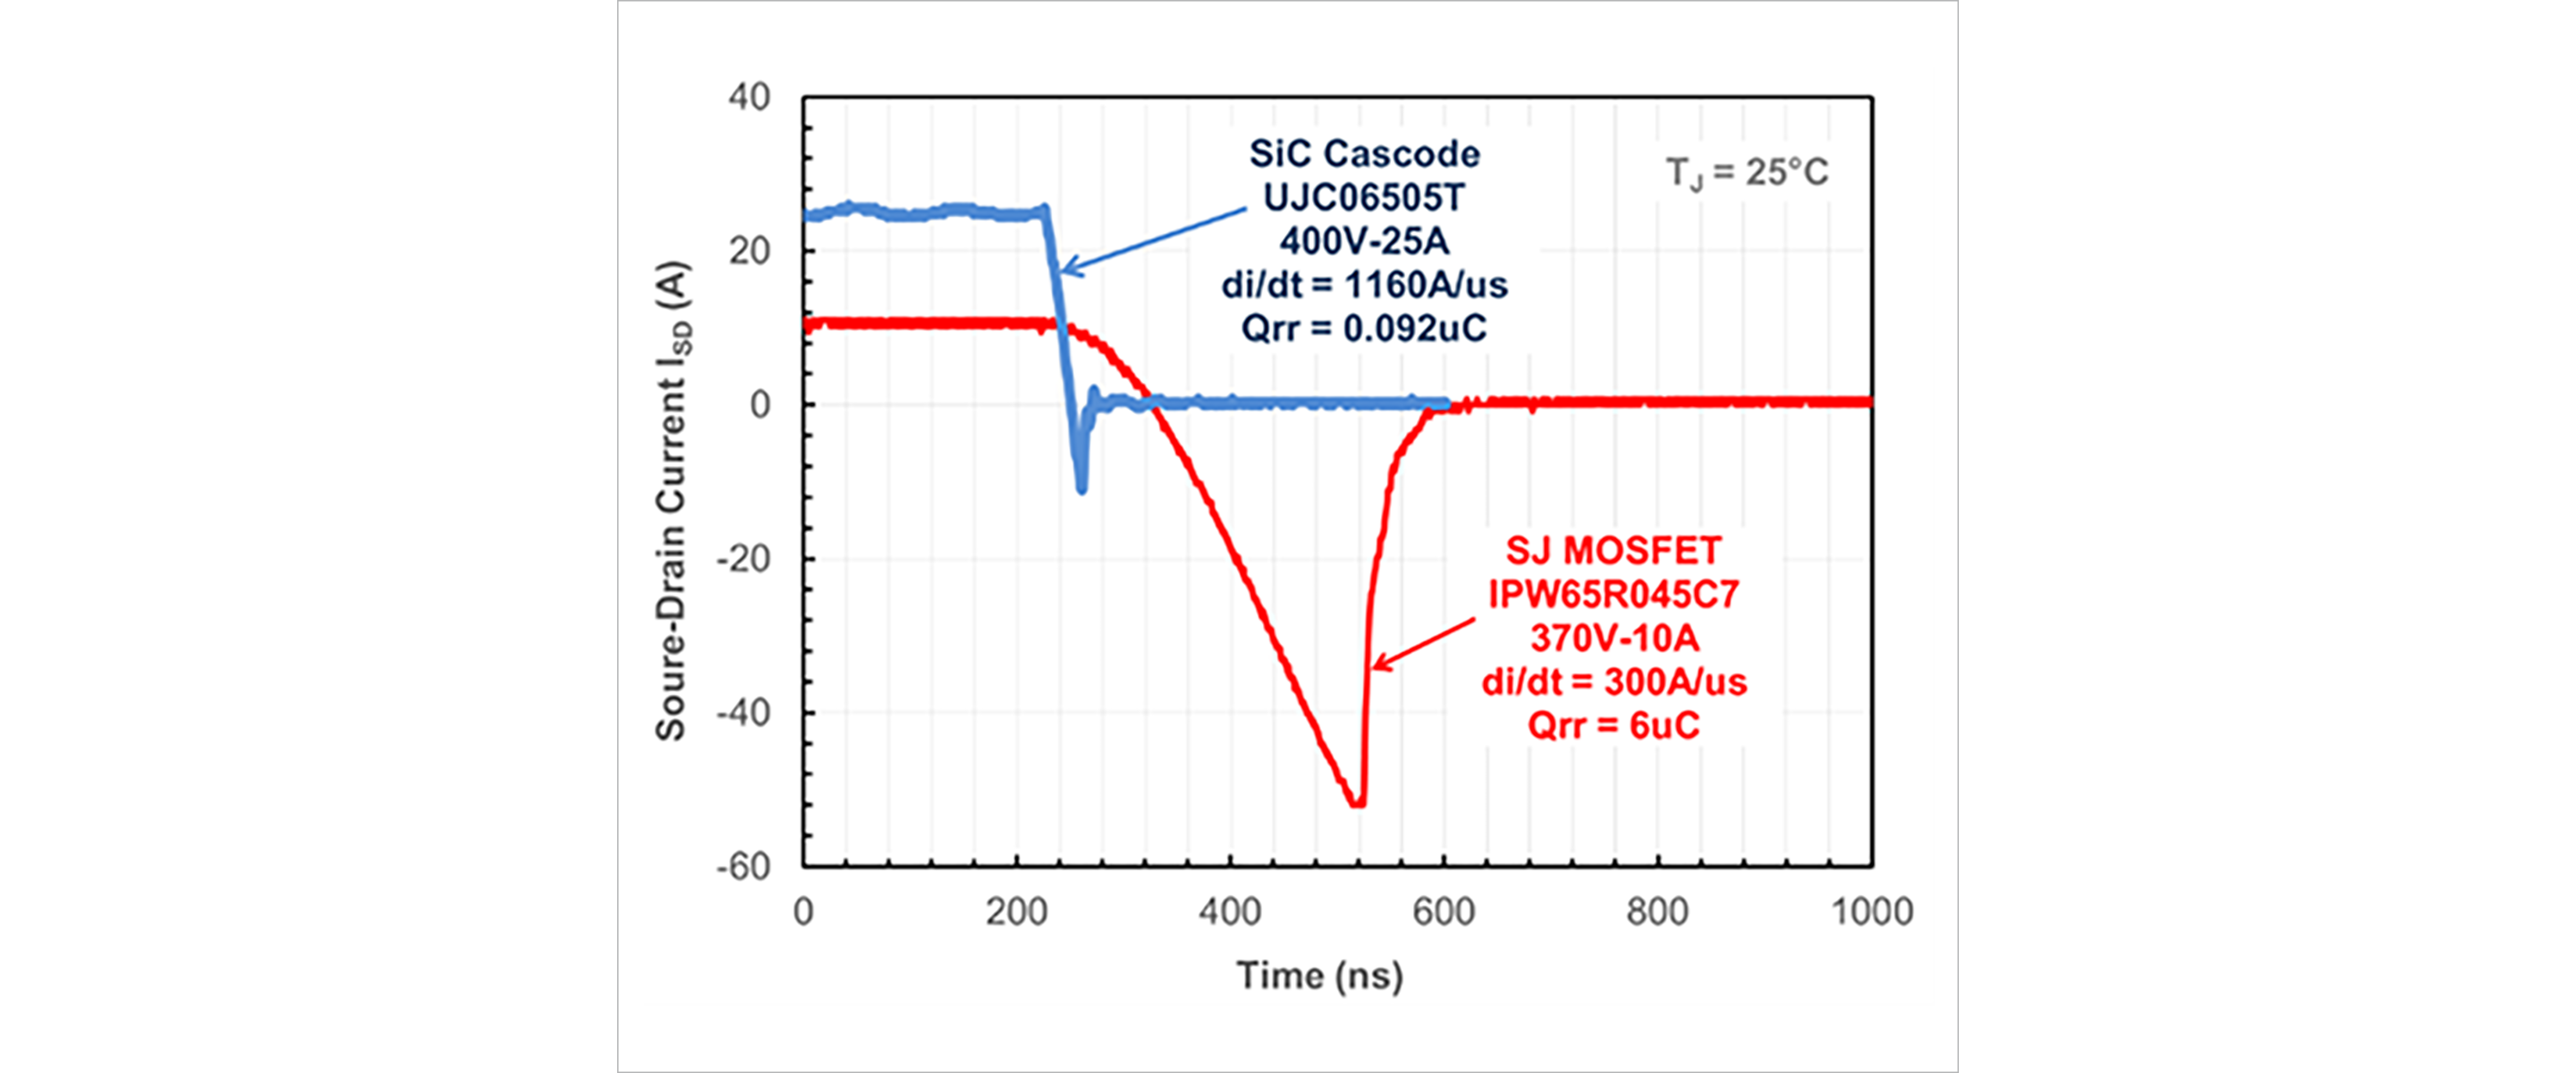 Figure 2: Comparison of current waveforms during reverse recovery between SJ MOSFET and Qorvo&#39;s SiC FET